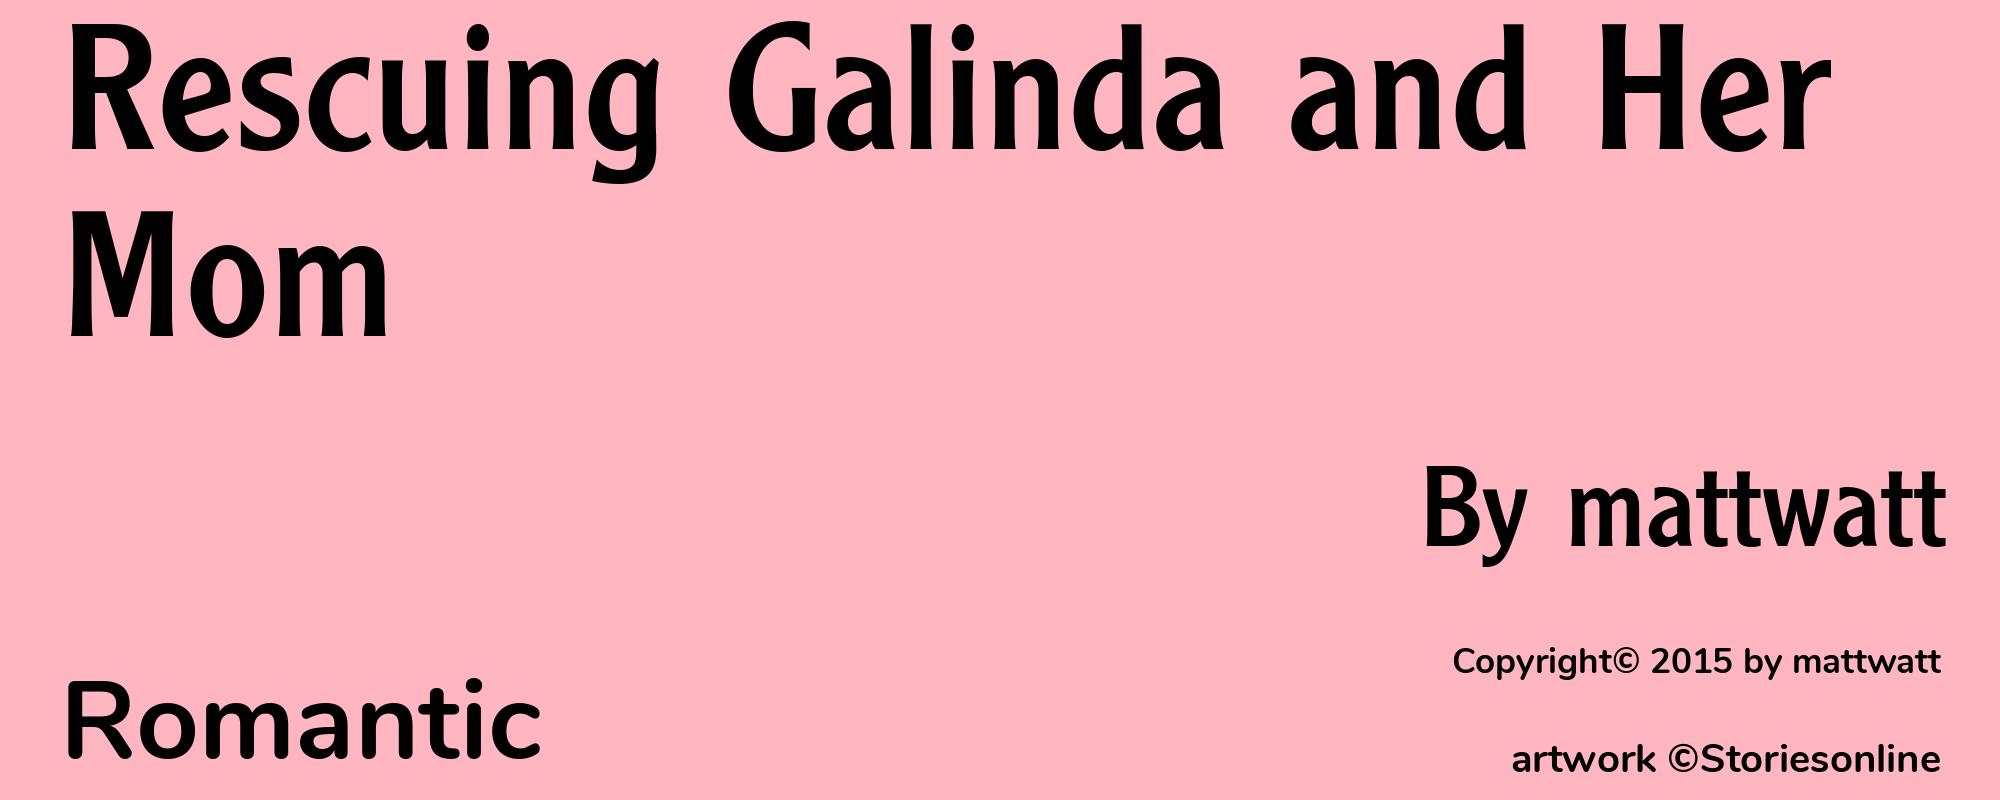 Rescuing Galinda and Her Mom - Cover